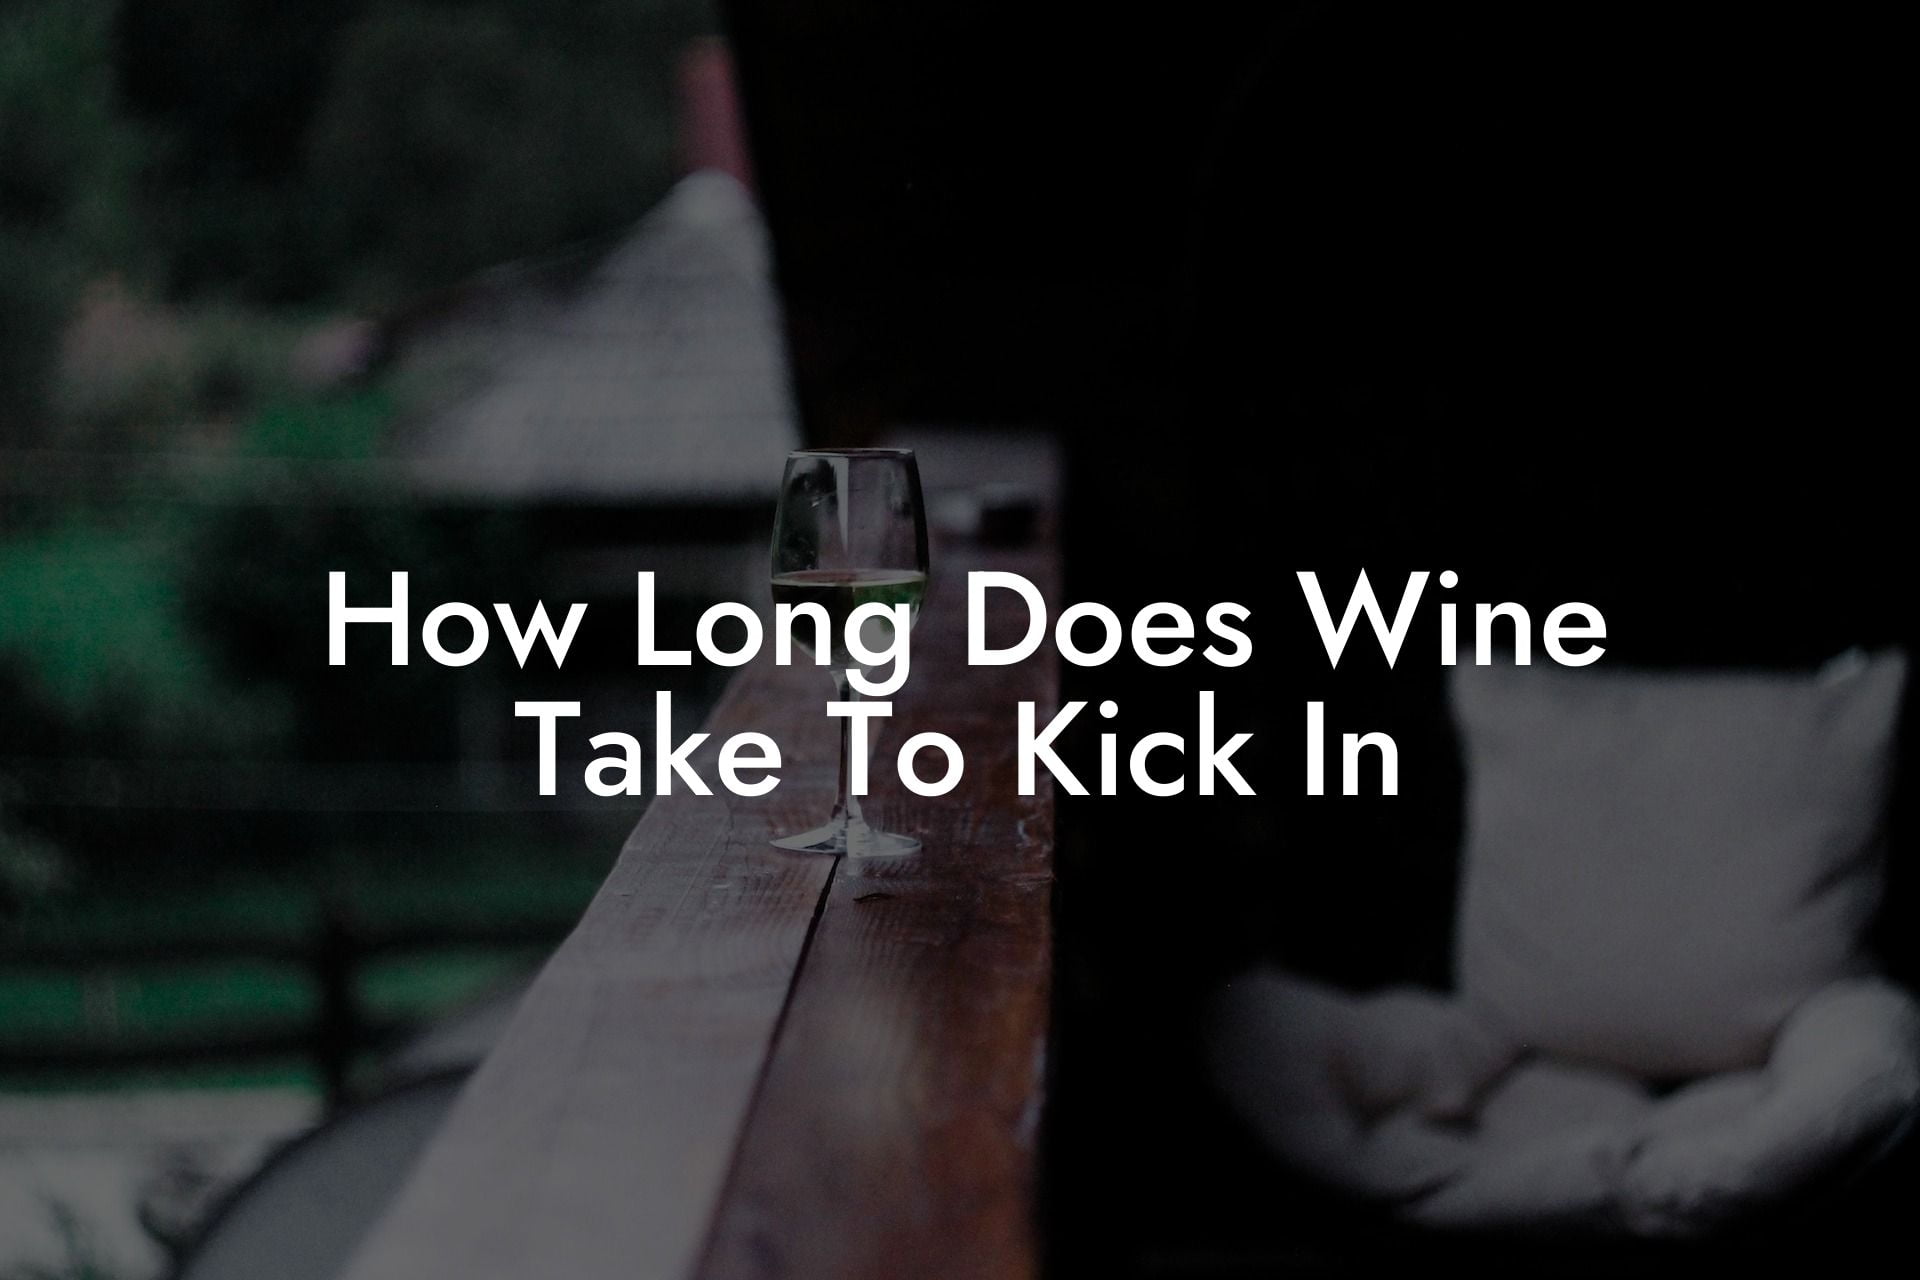 How Long Does Wine Take To Kick In